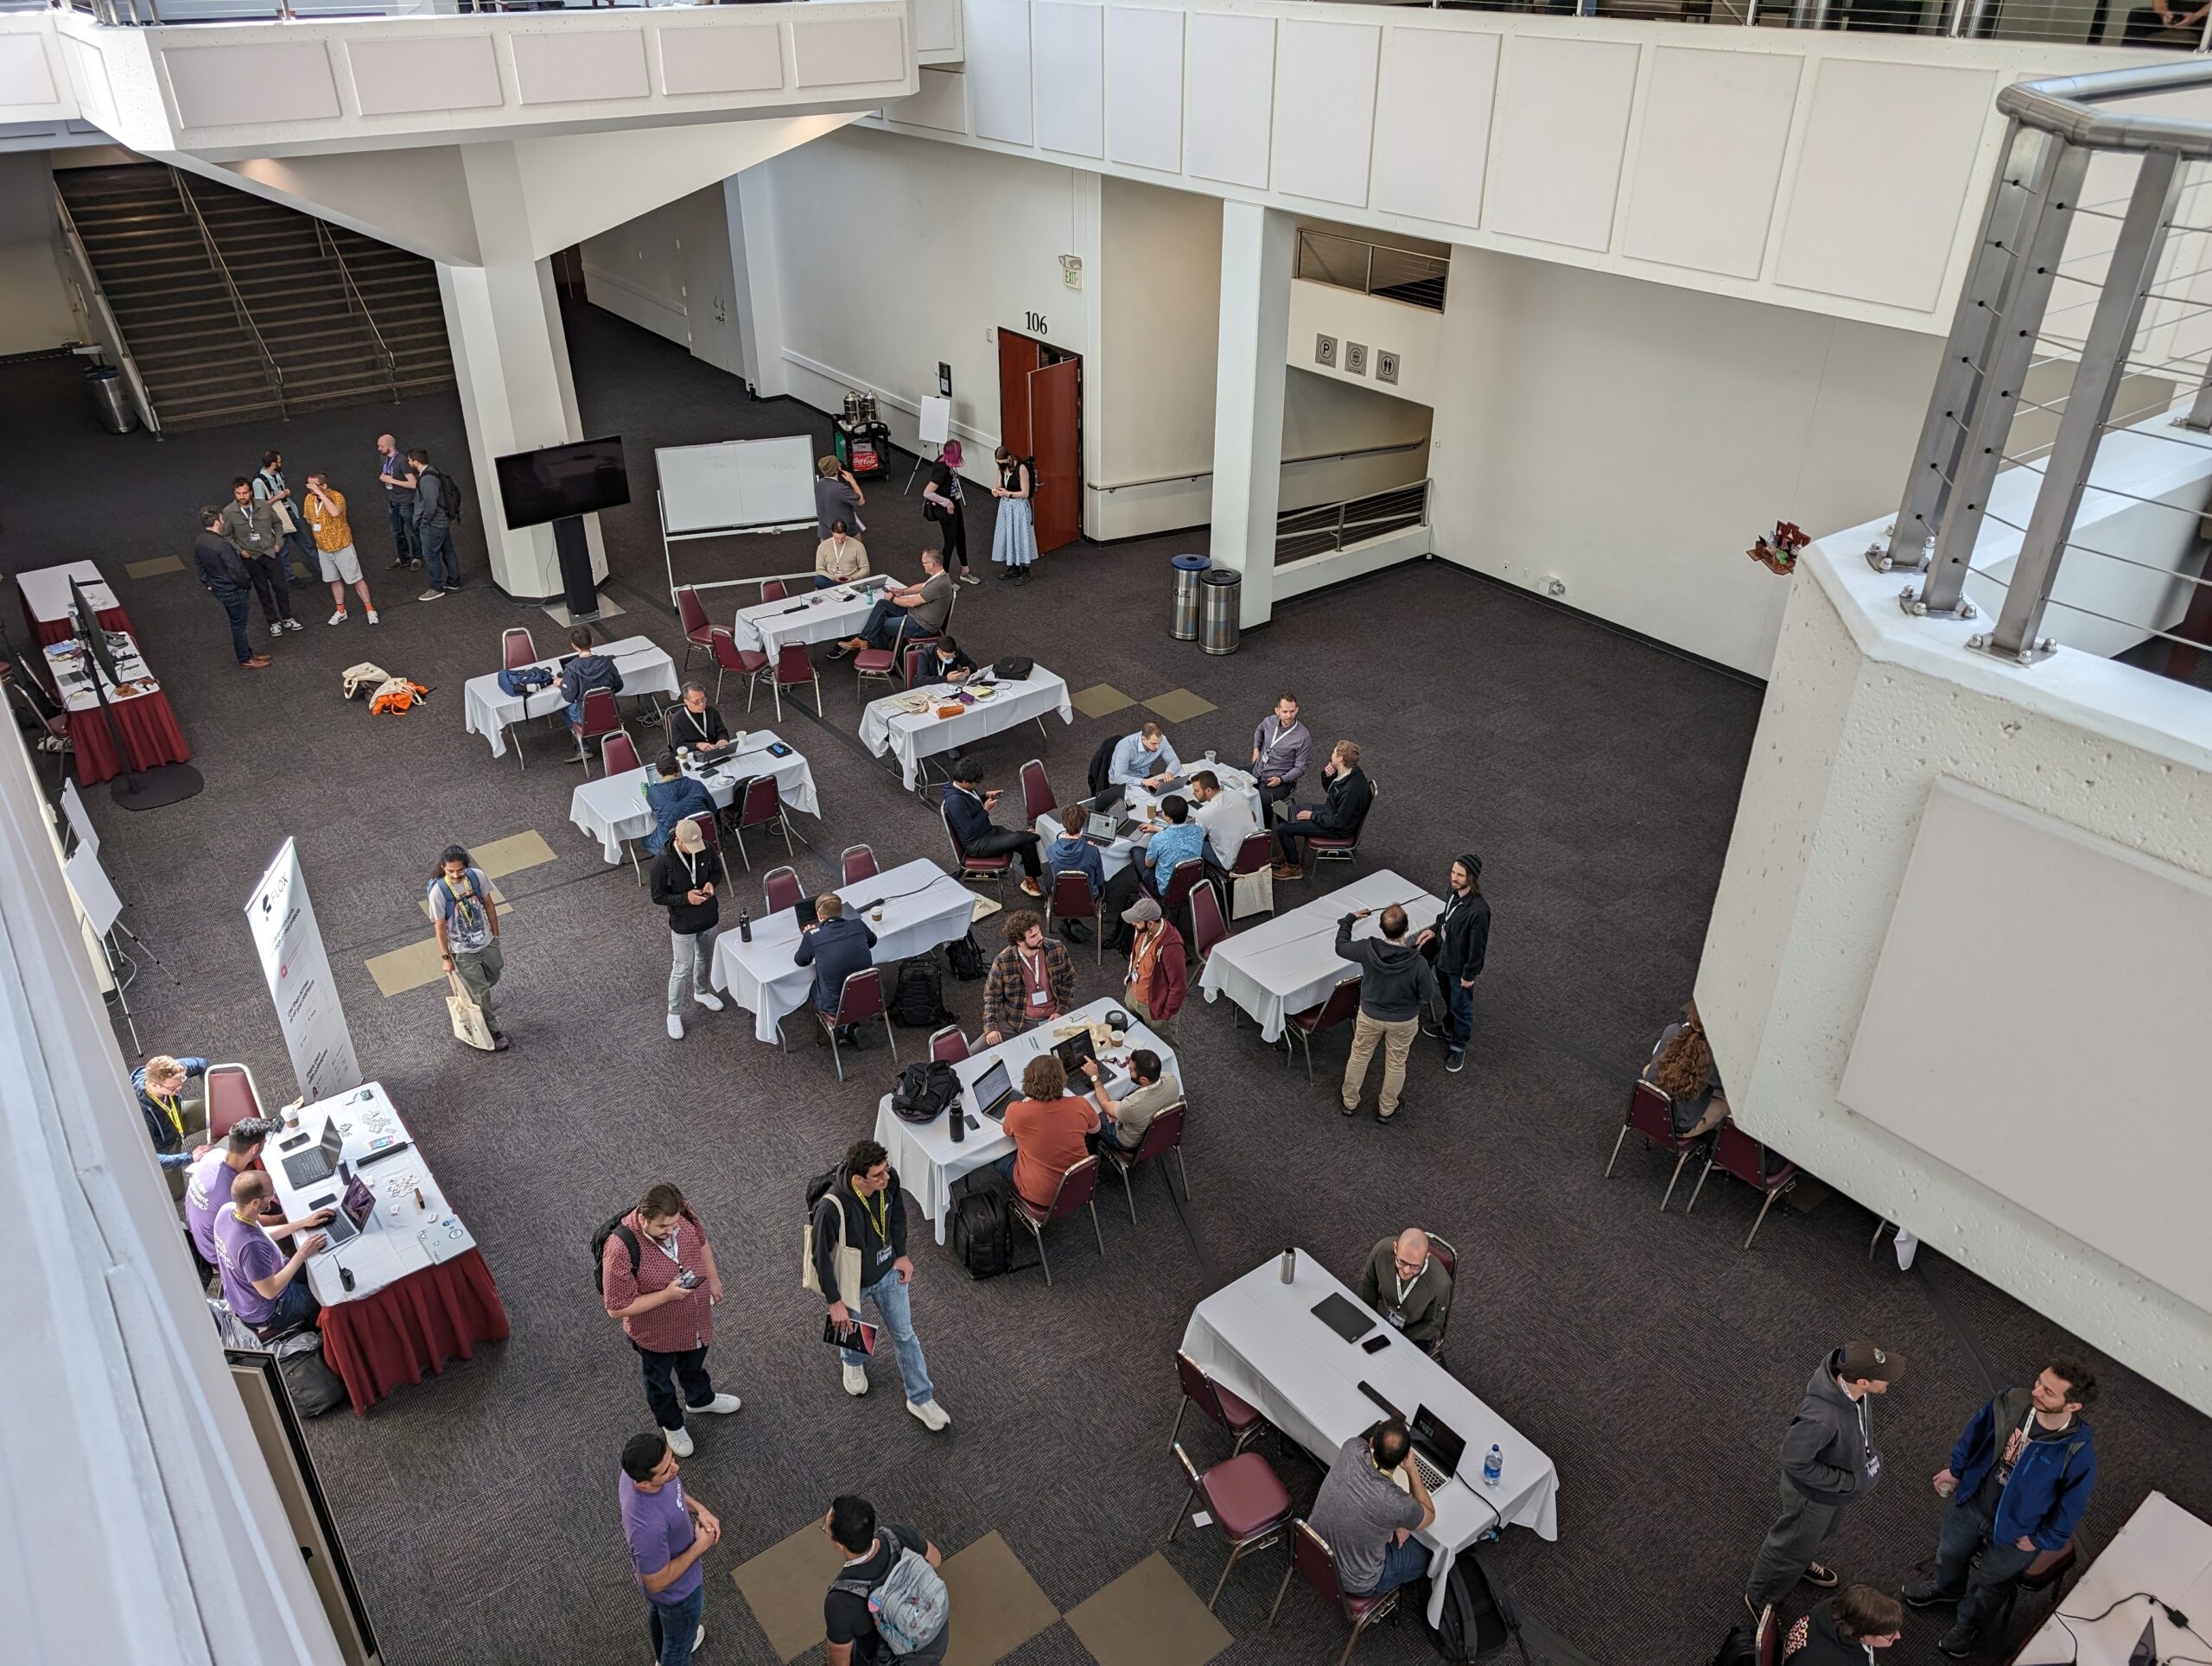 top-down view of the first floor of the Pasadena Conference Center from the second floor balcony. a picture of 40+ people chatting and/or working on laptops